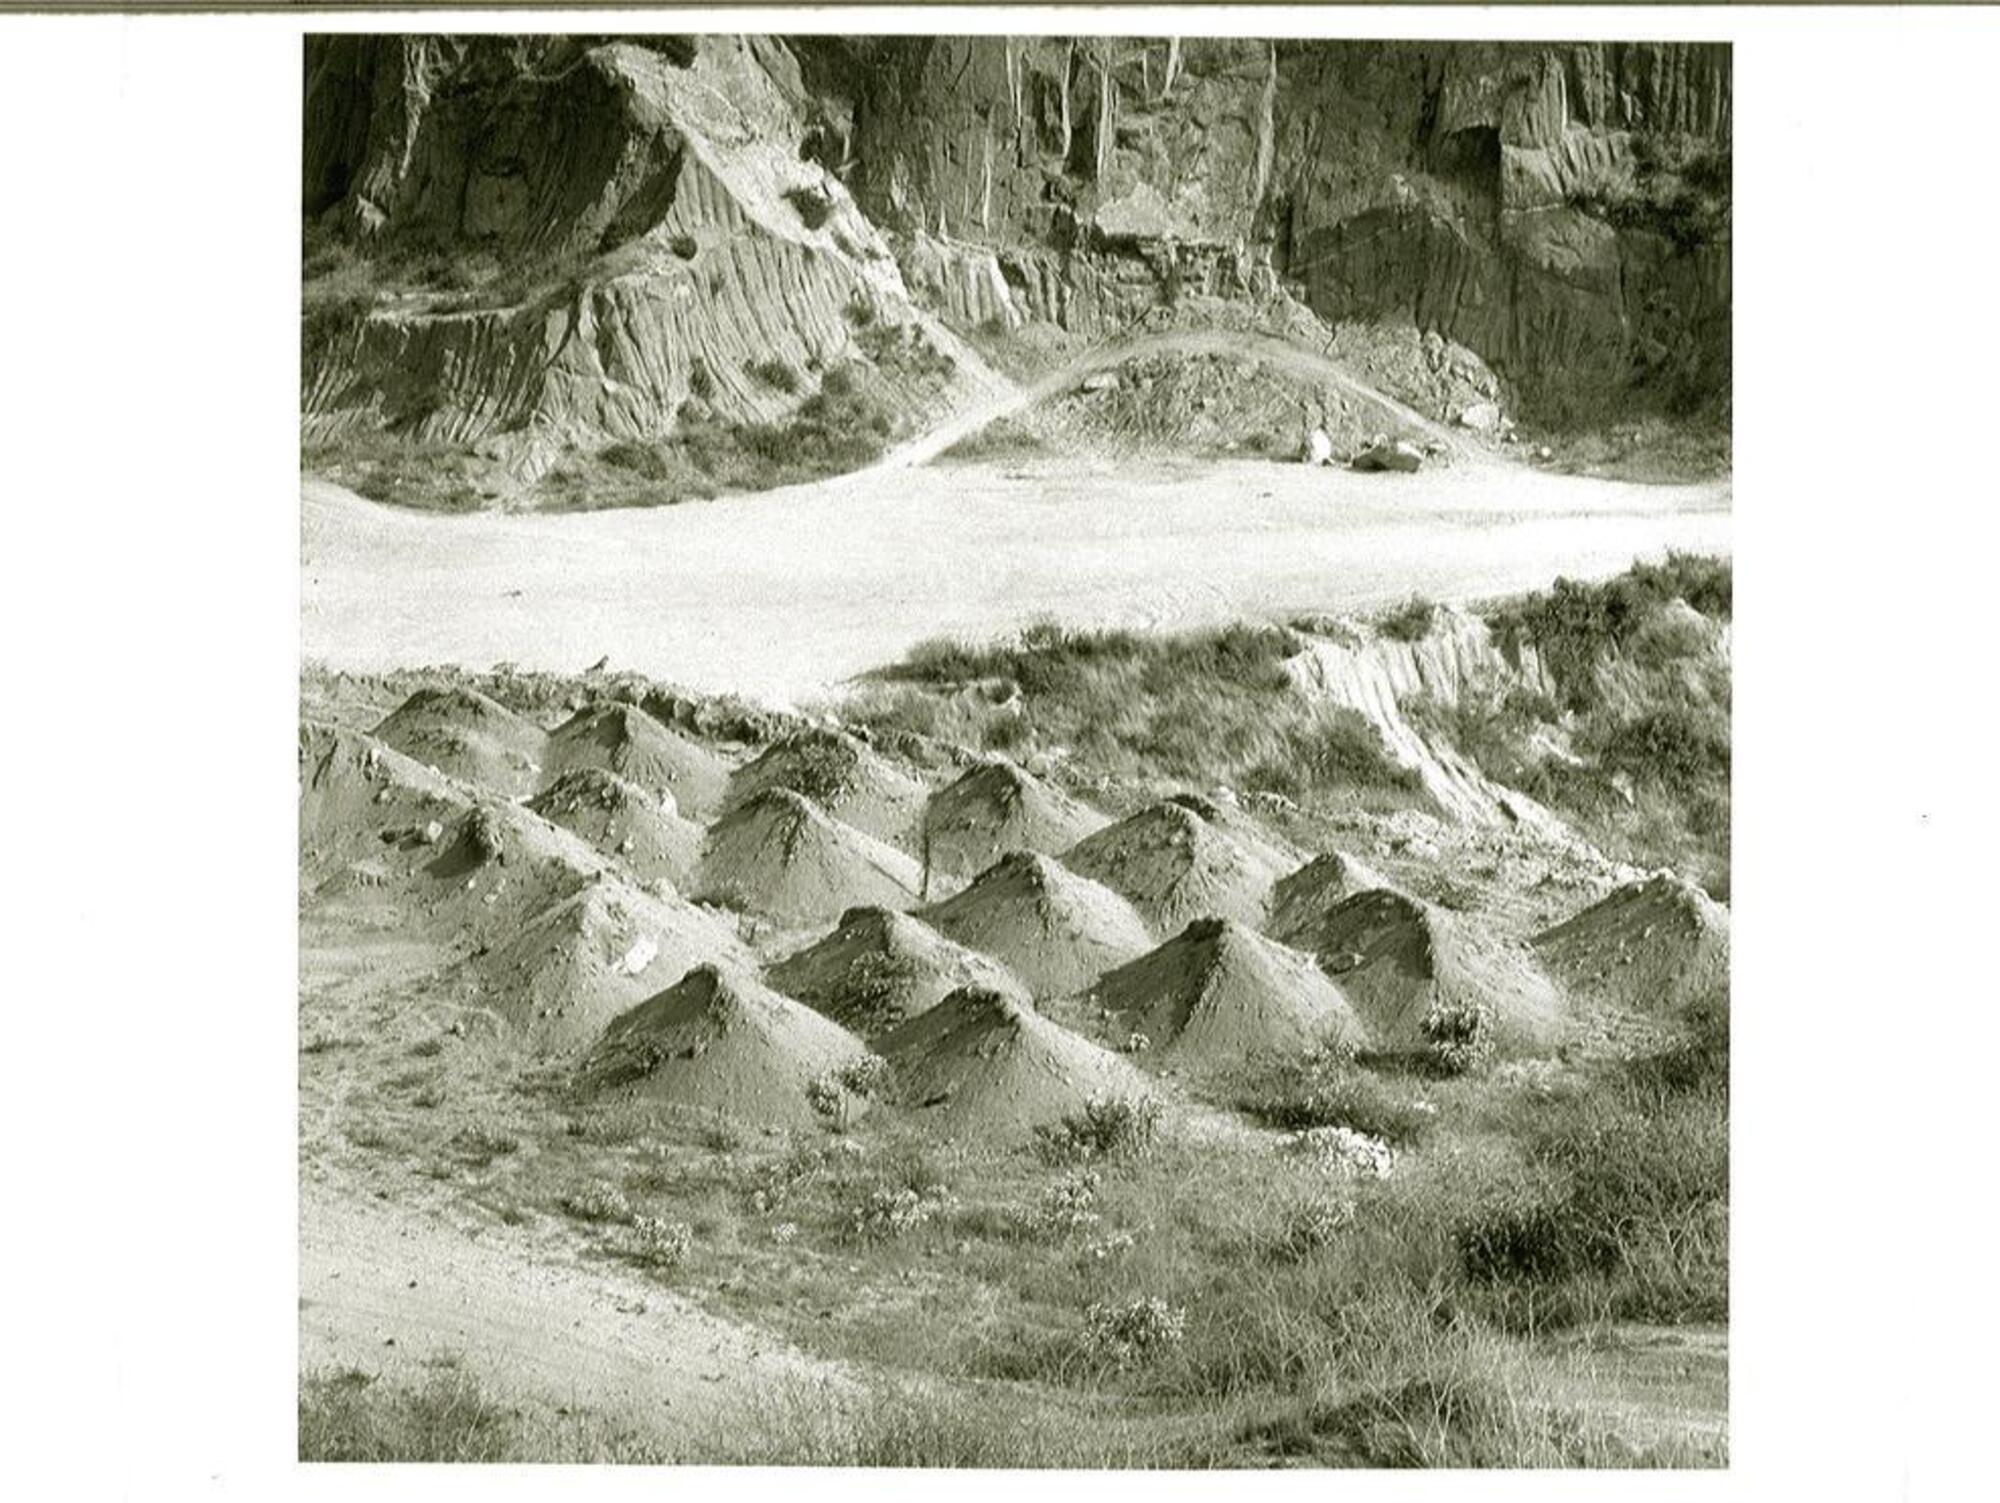 This is a black and white photograph depicting a rocky landscape scene. There are sharp cliff walls, striated with grooves, and two dirt roads with tire tracks. In the center portion, there is a grouping of seventeen piles of dirt, all of a similar size, and scrub like vegetation. The viewpoint is from above looking down.